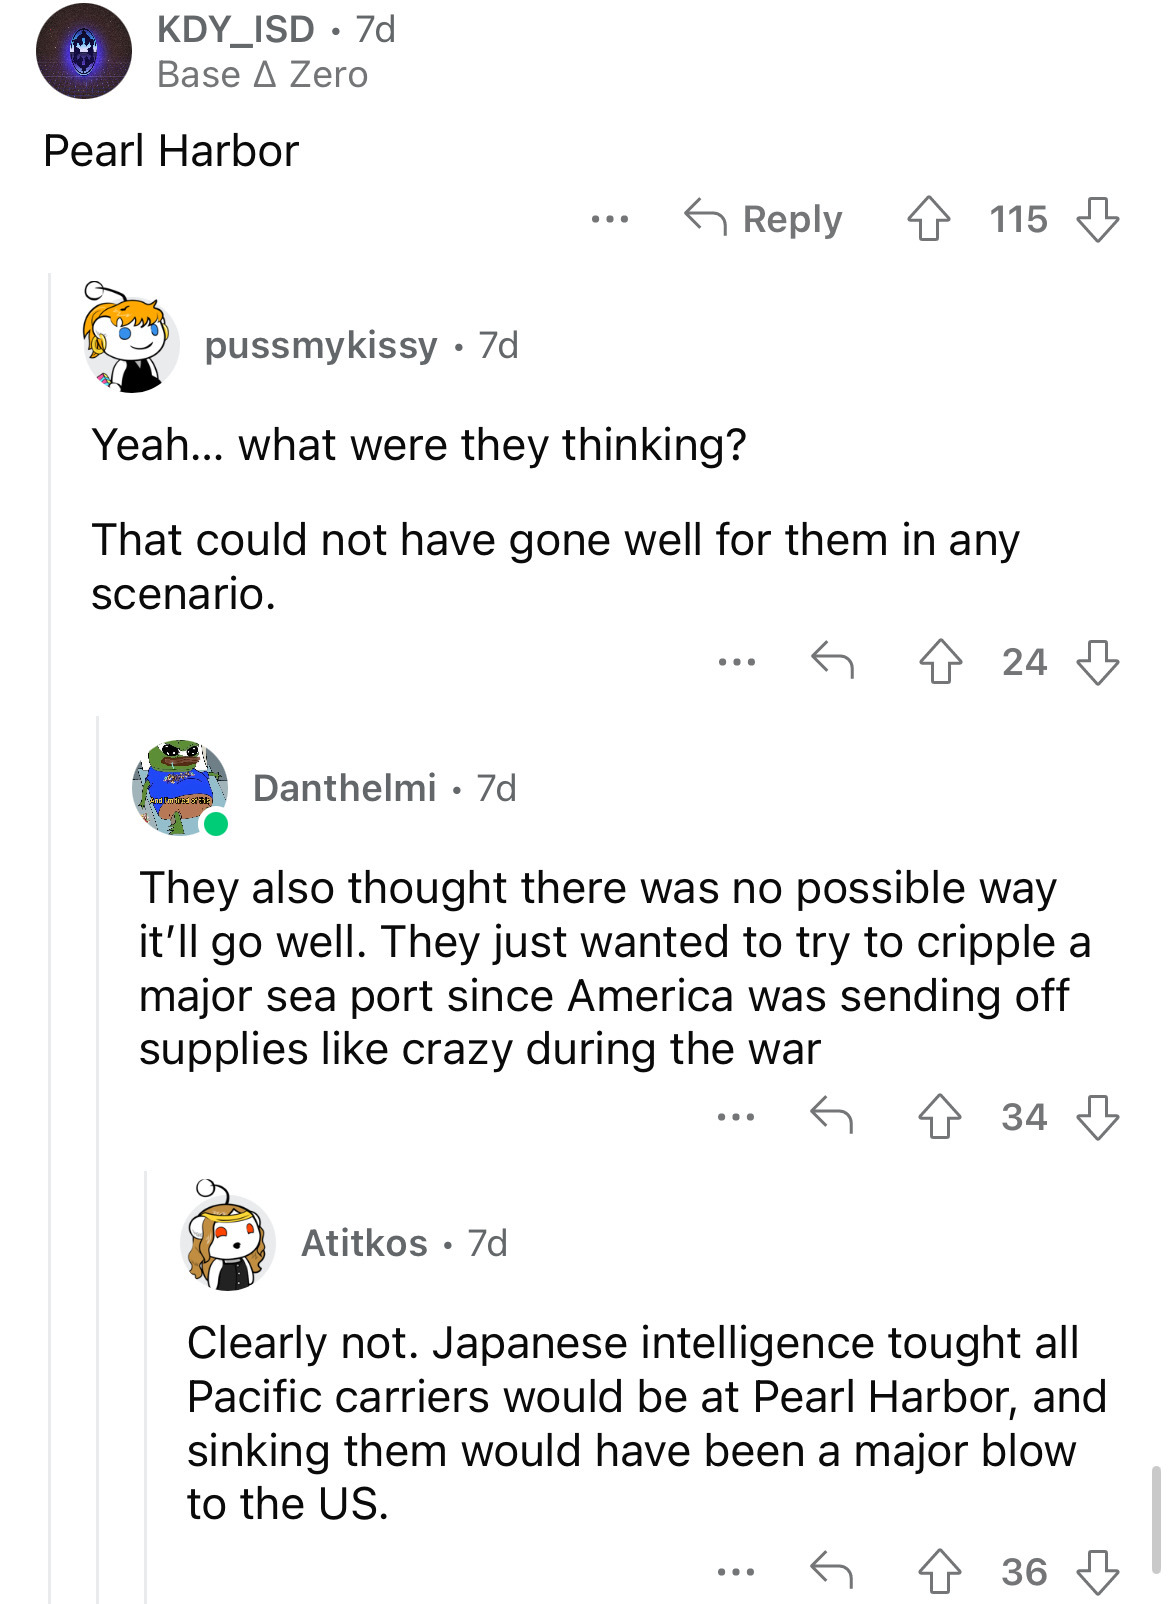 screenshot - KDY_ISD 7d Base A Zero Pearl Harbor ... 115 pussmykissy 7d Yeah... what were they thinking? That could not have gone well for them in any scenario. ... 24 Danthelmi 7d They also thought there was no possible way it'll go well. They just wante